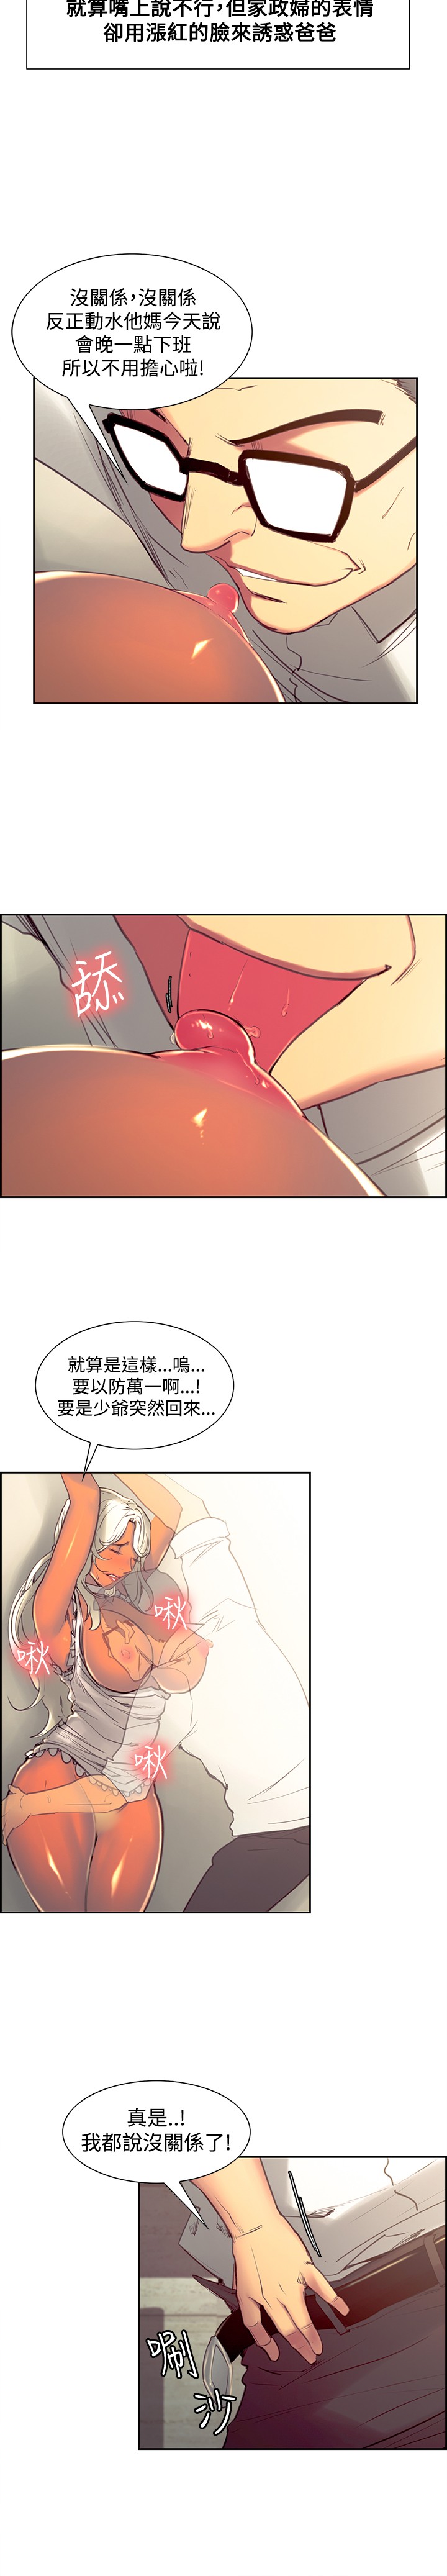 [Serious] Domesticate the Housekeeper 调教家政妇 Ch.29~41 [Chinese]中文 page 40 full